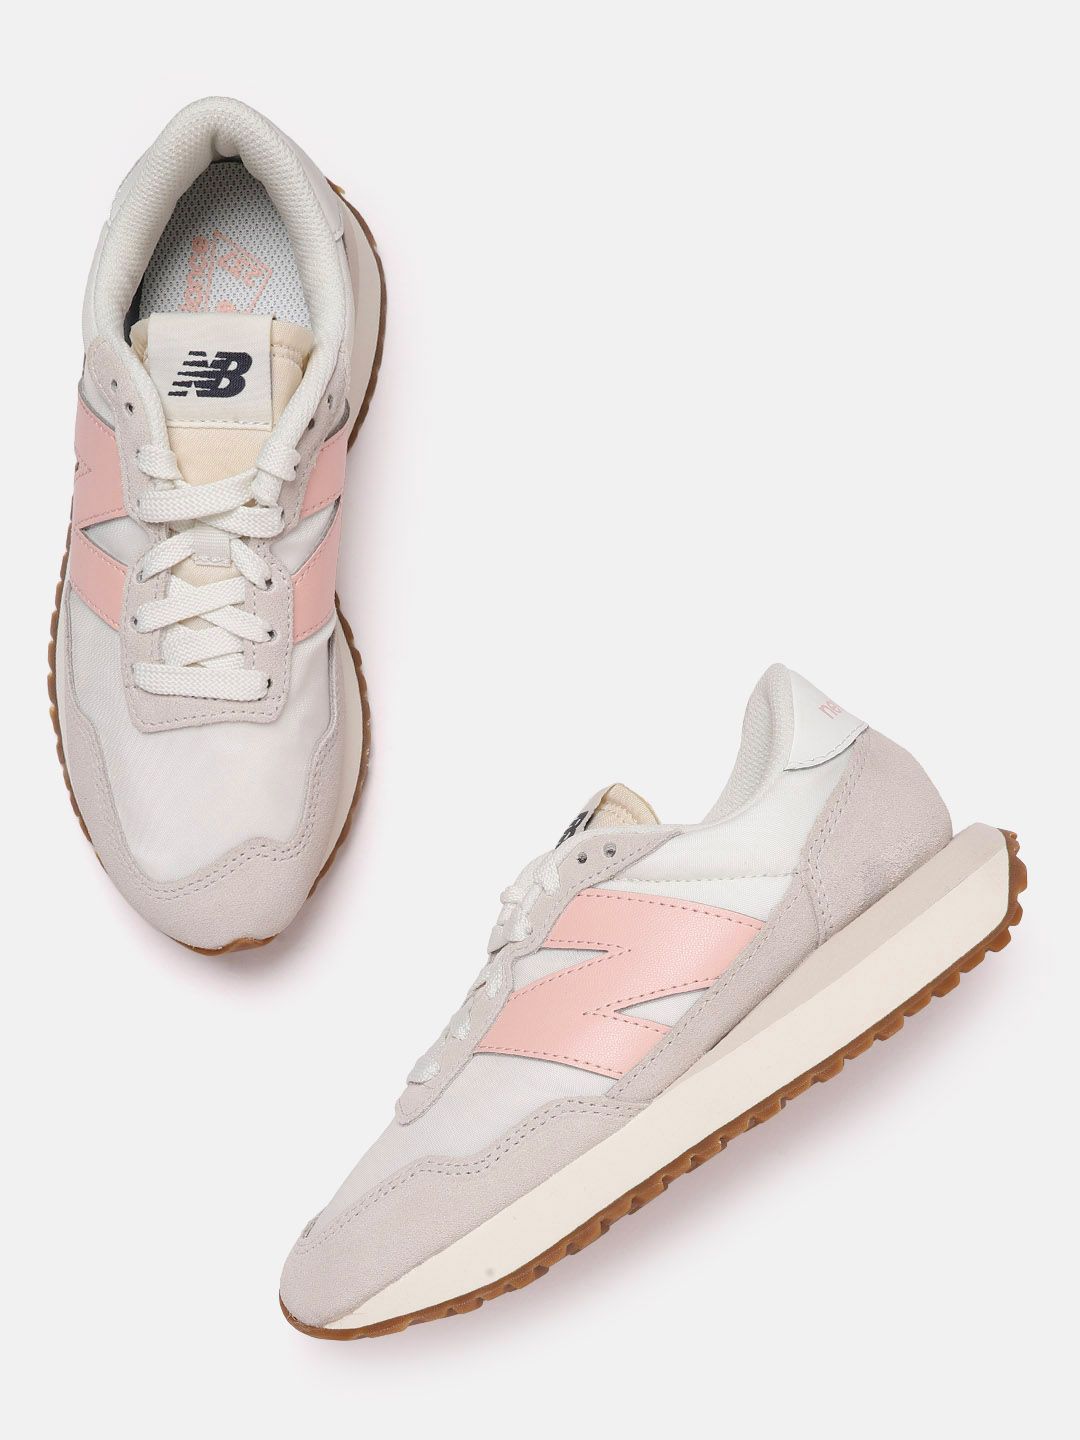 New Balance Women Off White Solid Suede Sneakers Price in India